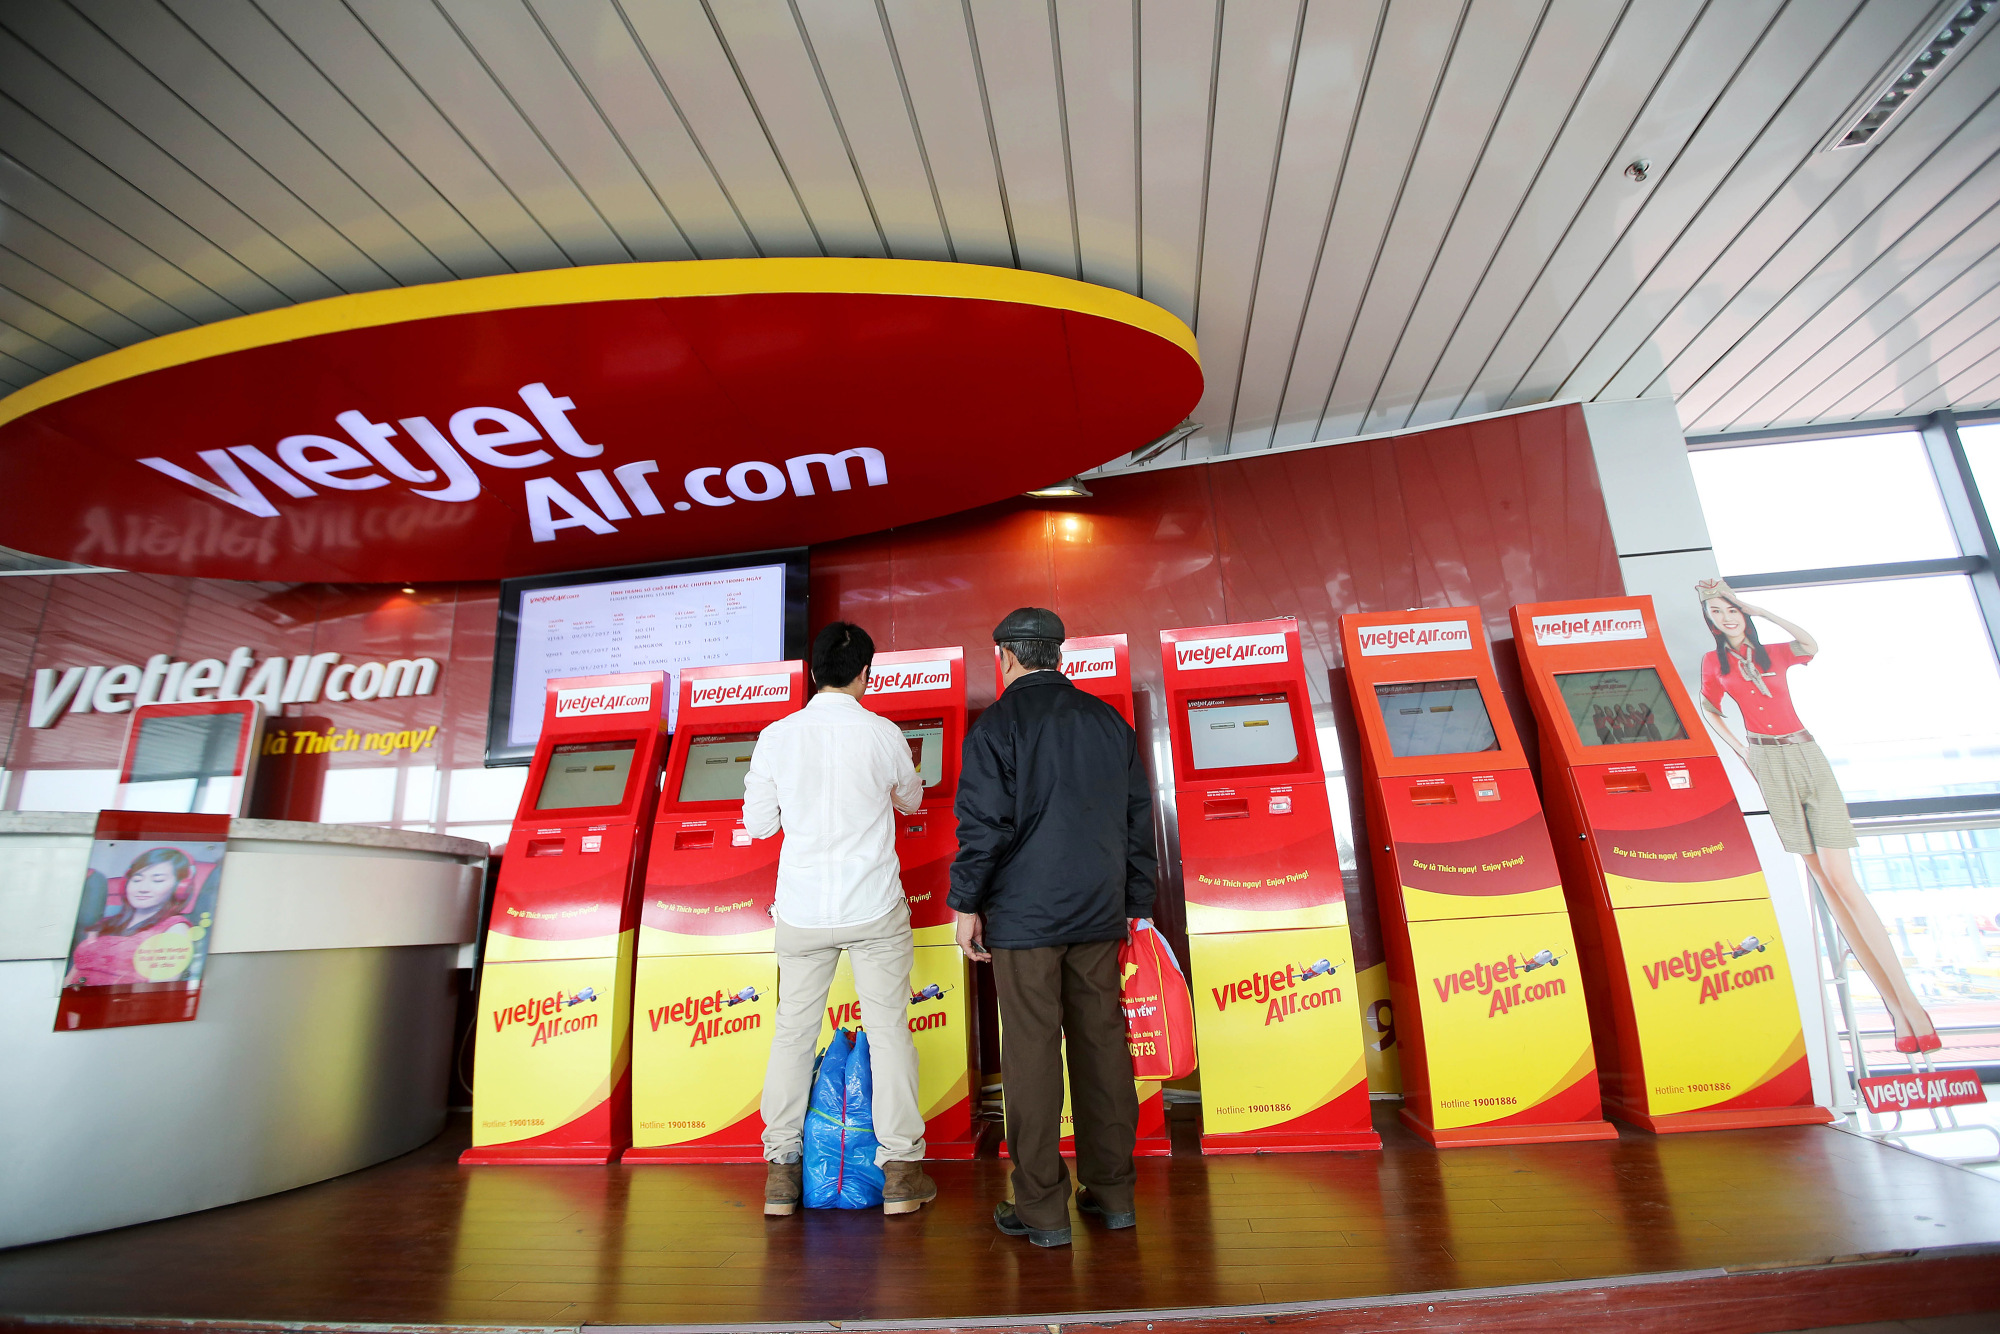 Passengers use an automated check-in machine for VietJet Air, operated by VietJet Aviation Joint Stock Co., at Noi Bai International Airport in Hanoi, Vietnam, on Monday, Jan. 9, 2017. VietJet, the Vietnam carrier known for its bikini-clad flight attendants, expects profit to surge 30 percent this year on rising passengers as it prepares for its Ho Chi Minh City Stock Exchange listing debut in February.